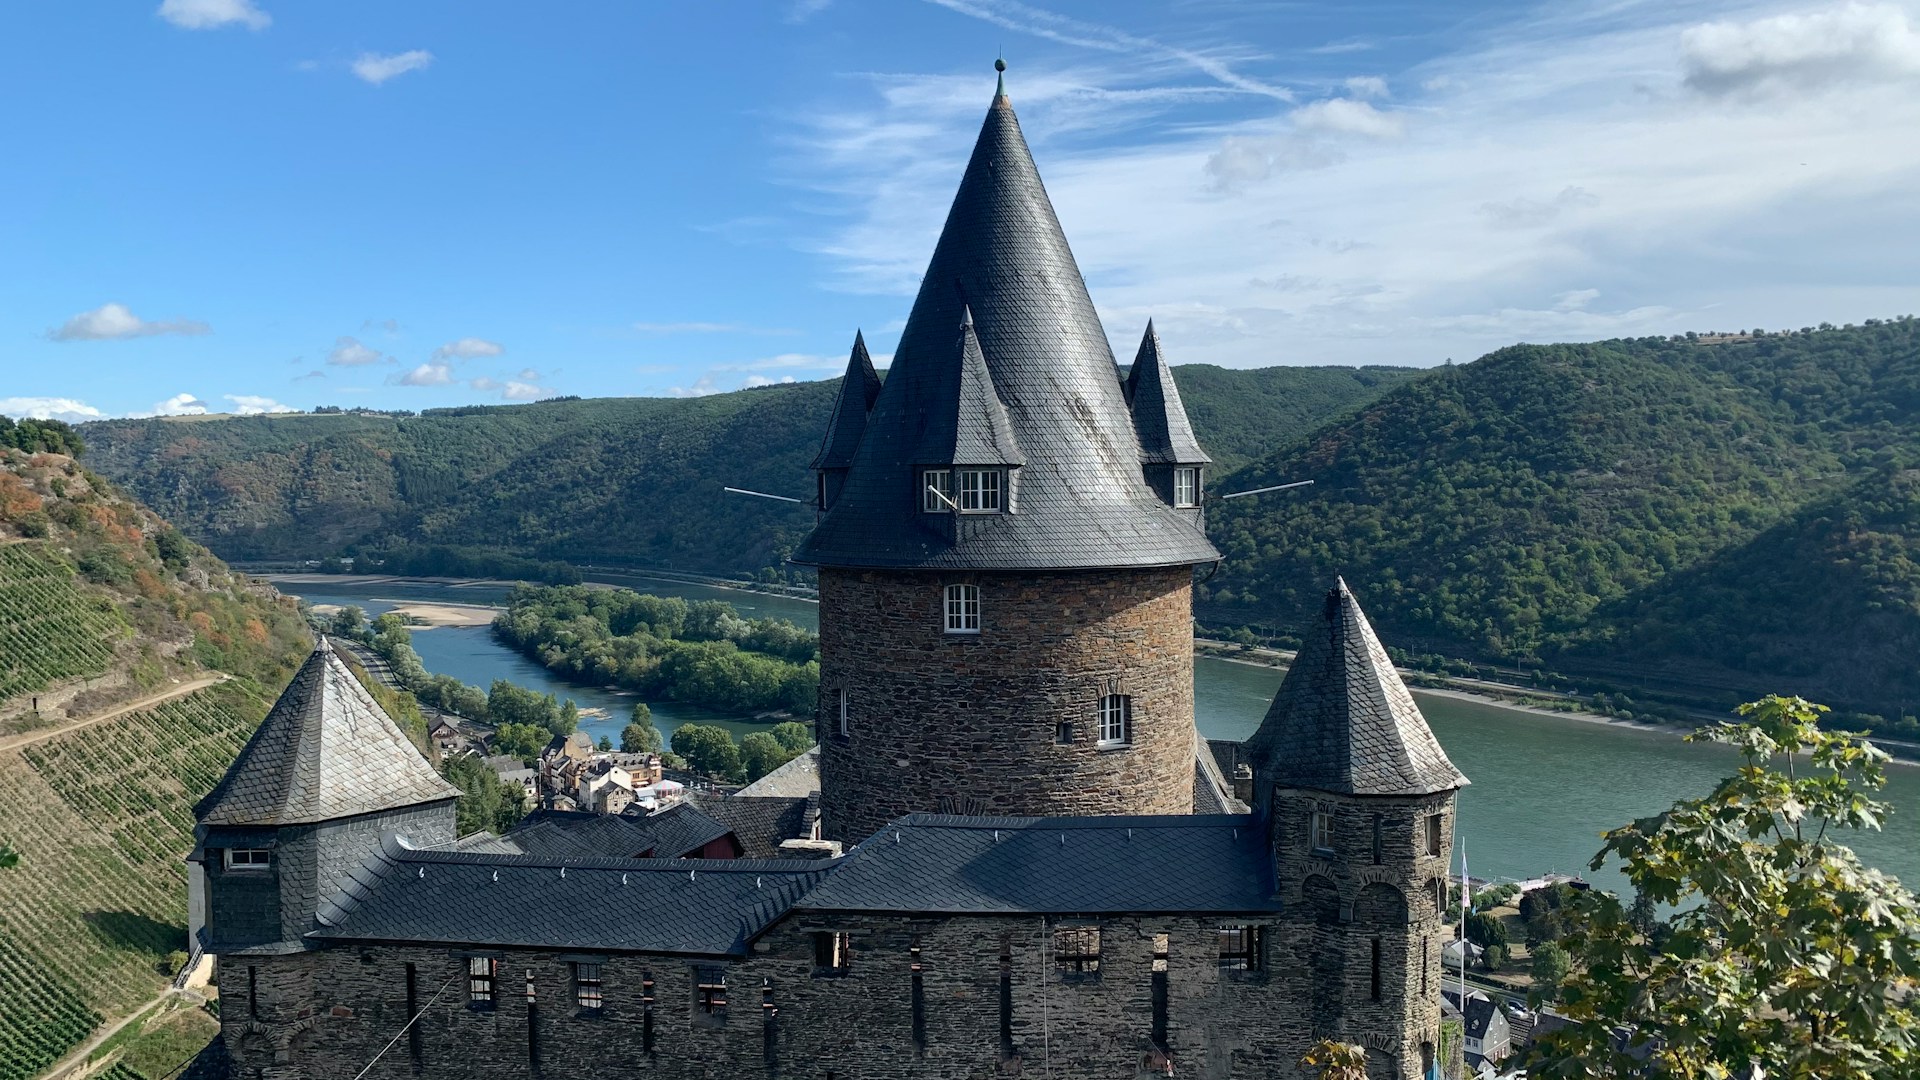 View of Stahleck Castle in Bacharach, with the Rhine Valley and step-sided vineyards in the background